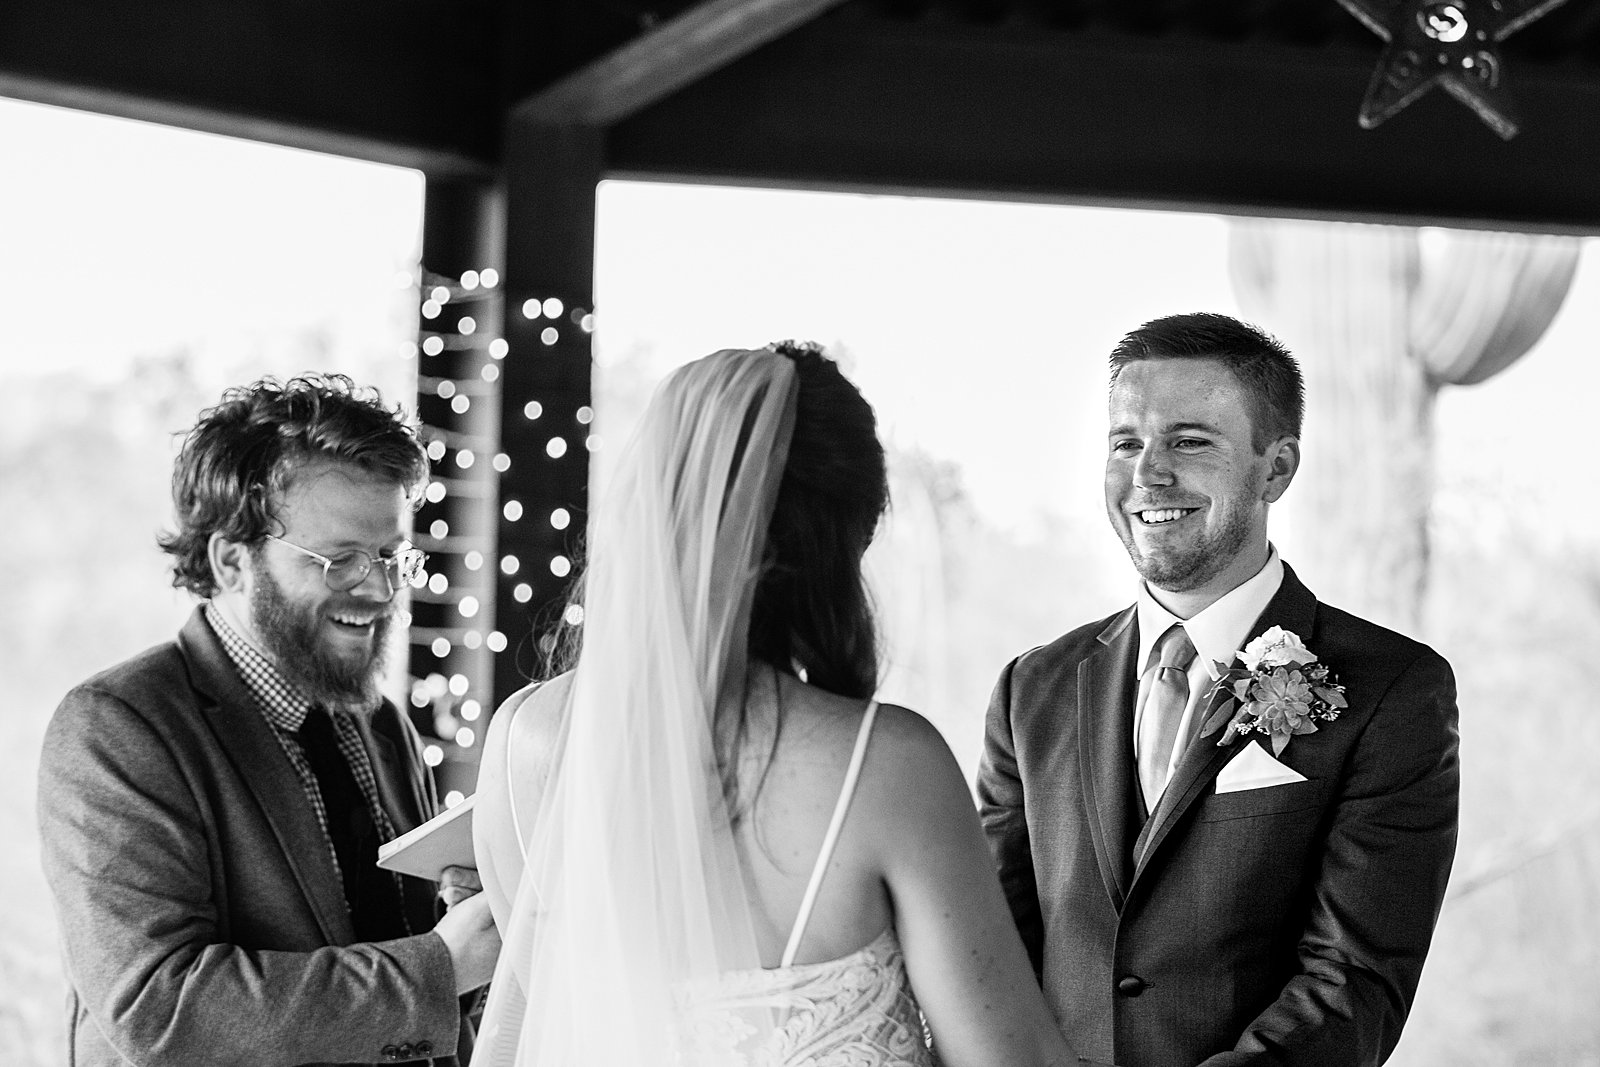 Groom looking at his bride during their wedding ceremony at Desert Botanical Gardens by Phoenix wedding photographer PMA Photography.